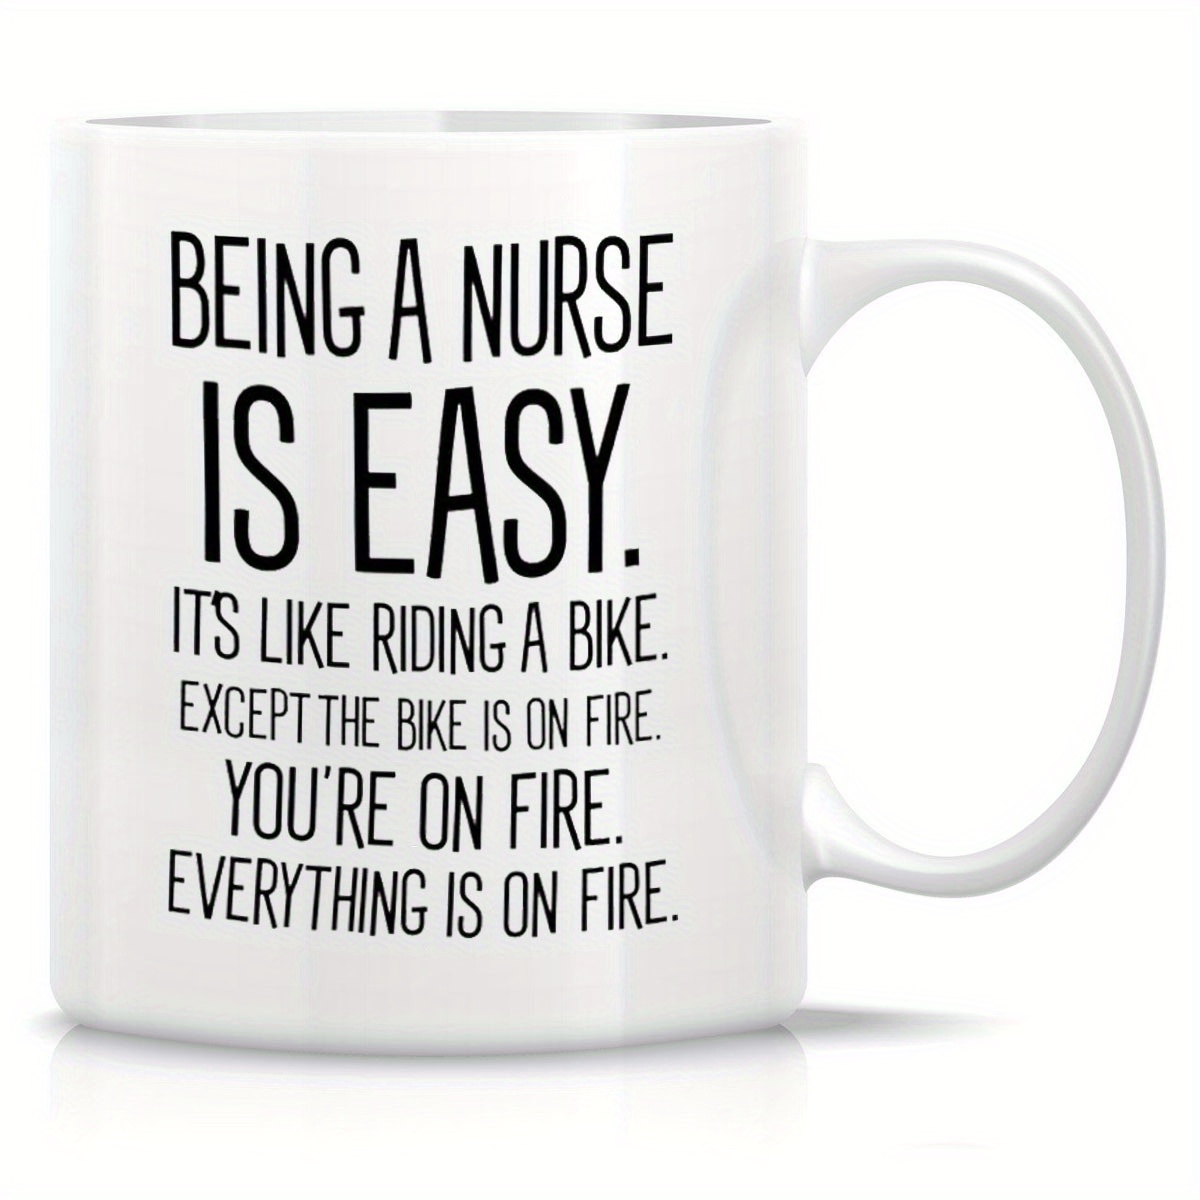 

1pc, Funny Mug - Being A Nurse Is Easy 11 Oz Ceramic Coffee Mugs - Funny, Sarcasm, Motivational, Rn, Nursing Student, Inspirational Birthday Gifts For Friends, Coworkers, Sister, Brother, Dad, Mom